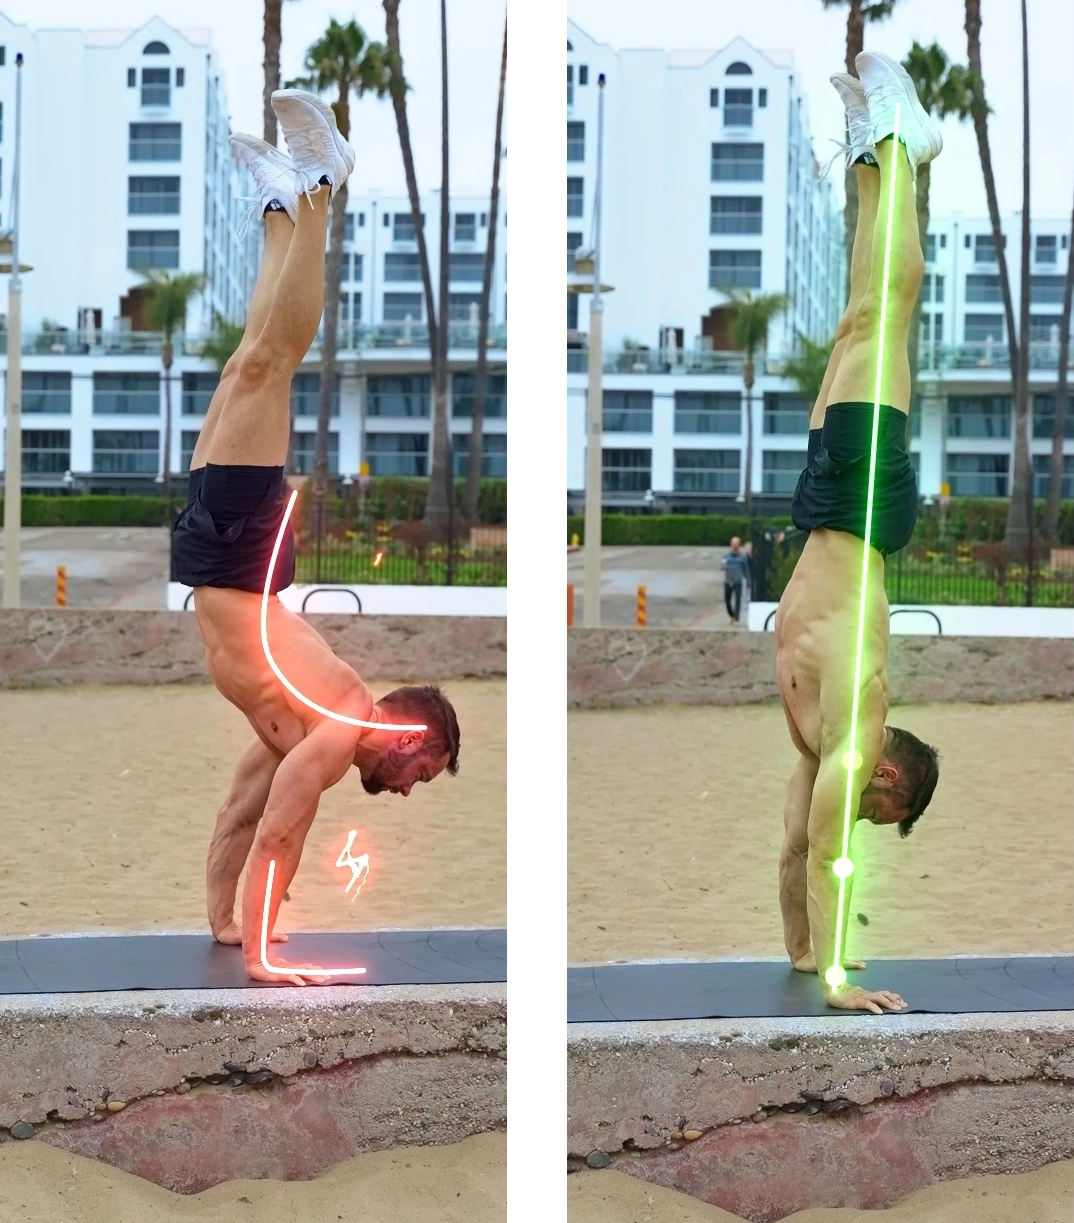 Blog – How to Handstand Push Up – Coach Bachmann